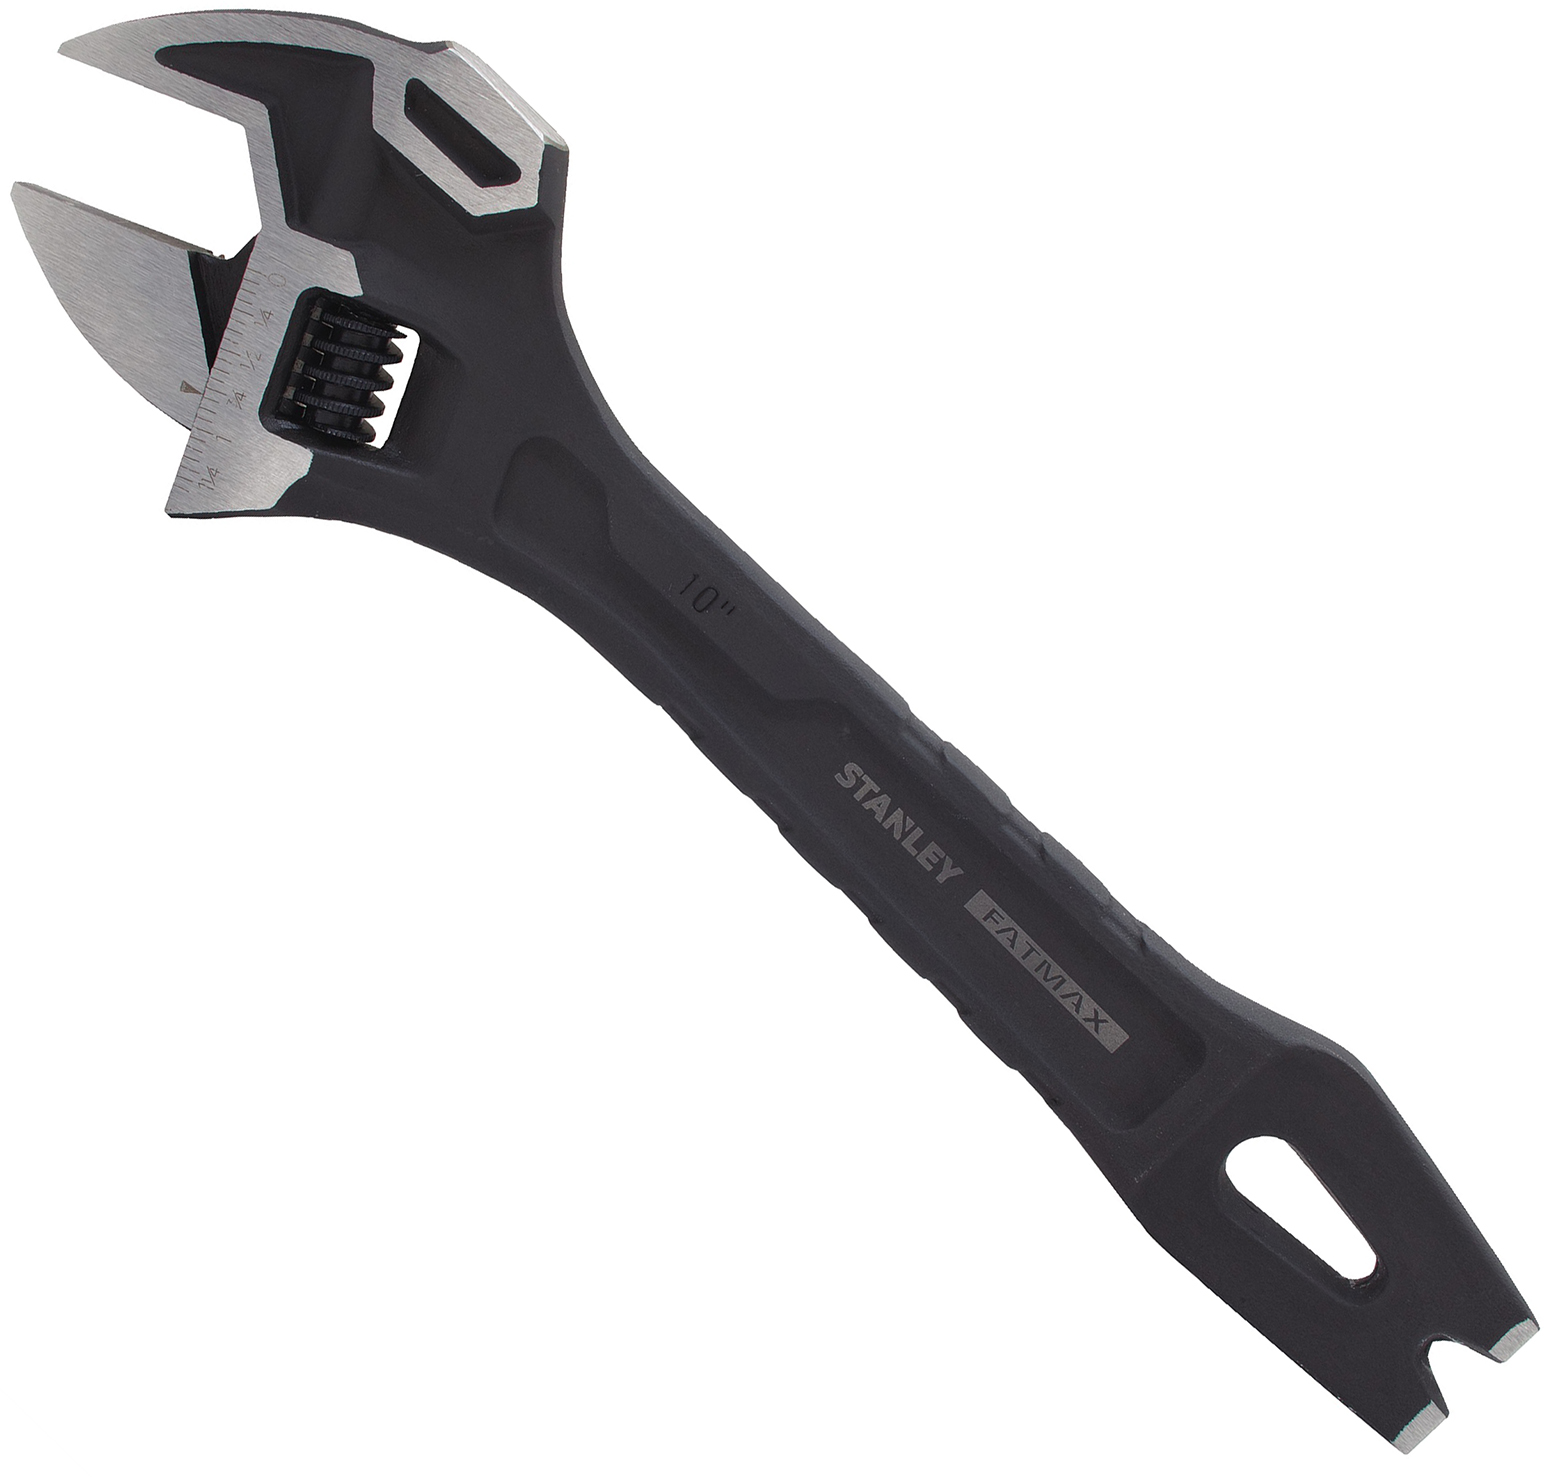 Stanley FatMax FMHT75081 10" Black/Gray Adjustable Demo Wrench - image 1 of 3